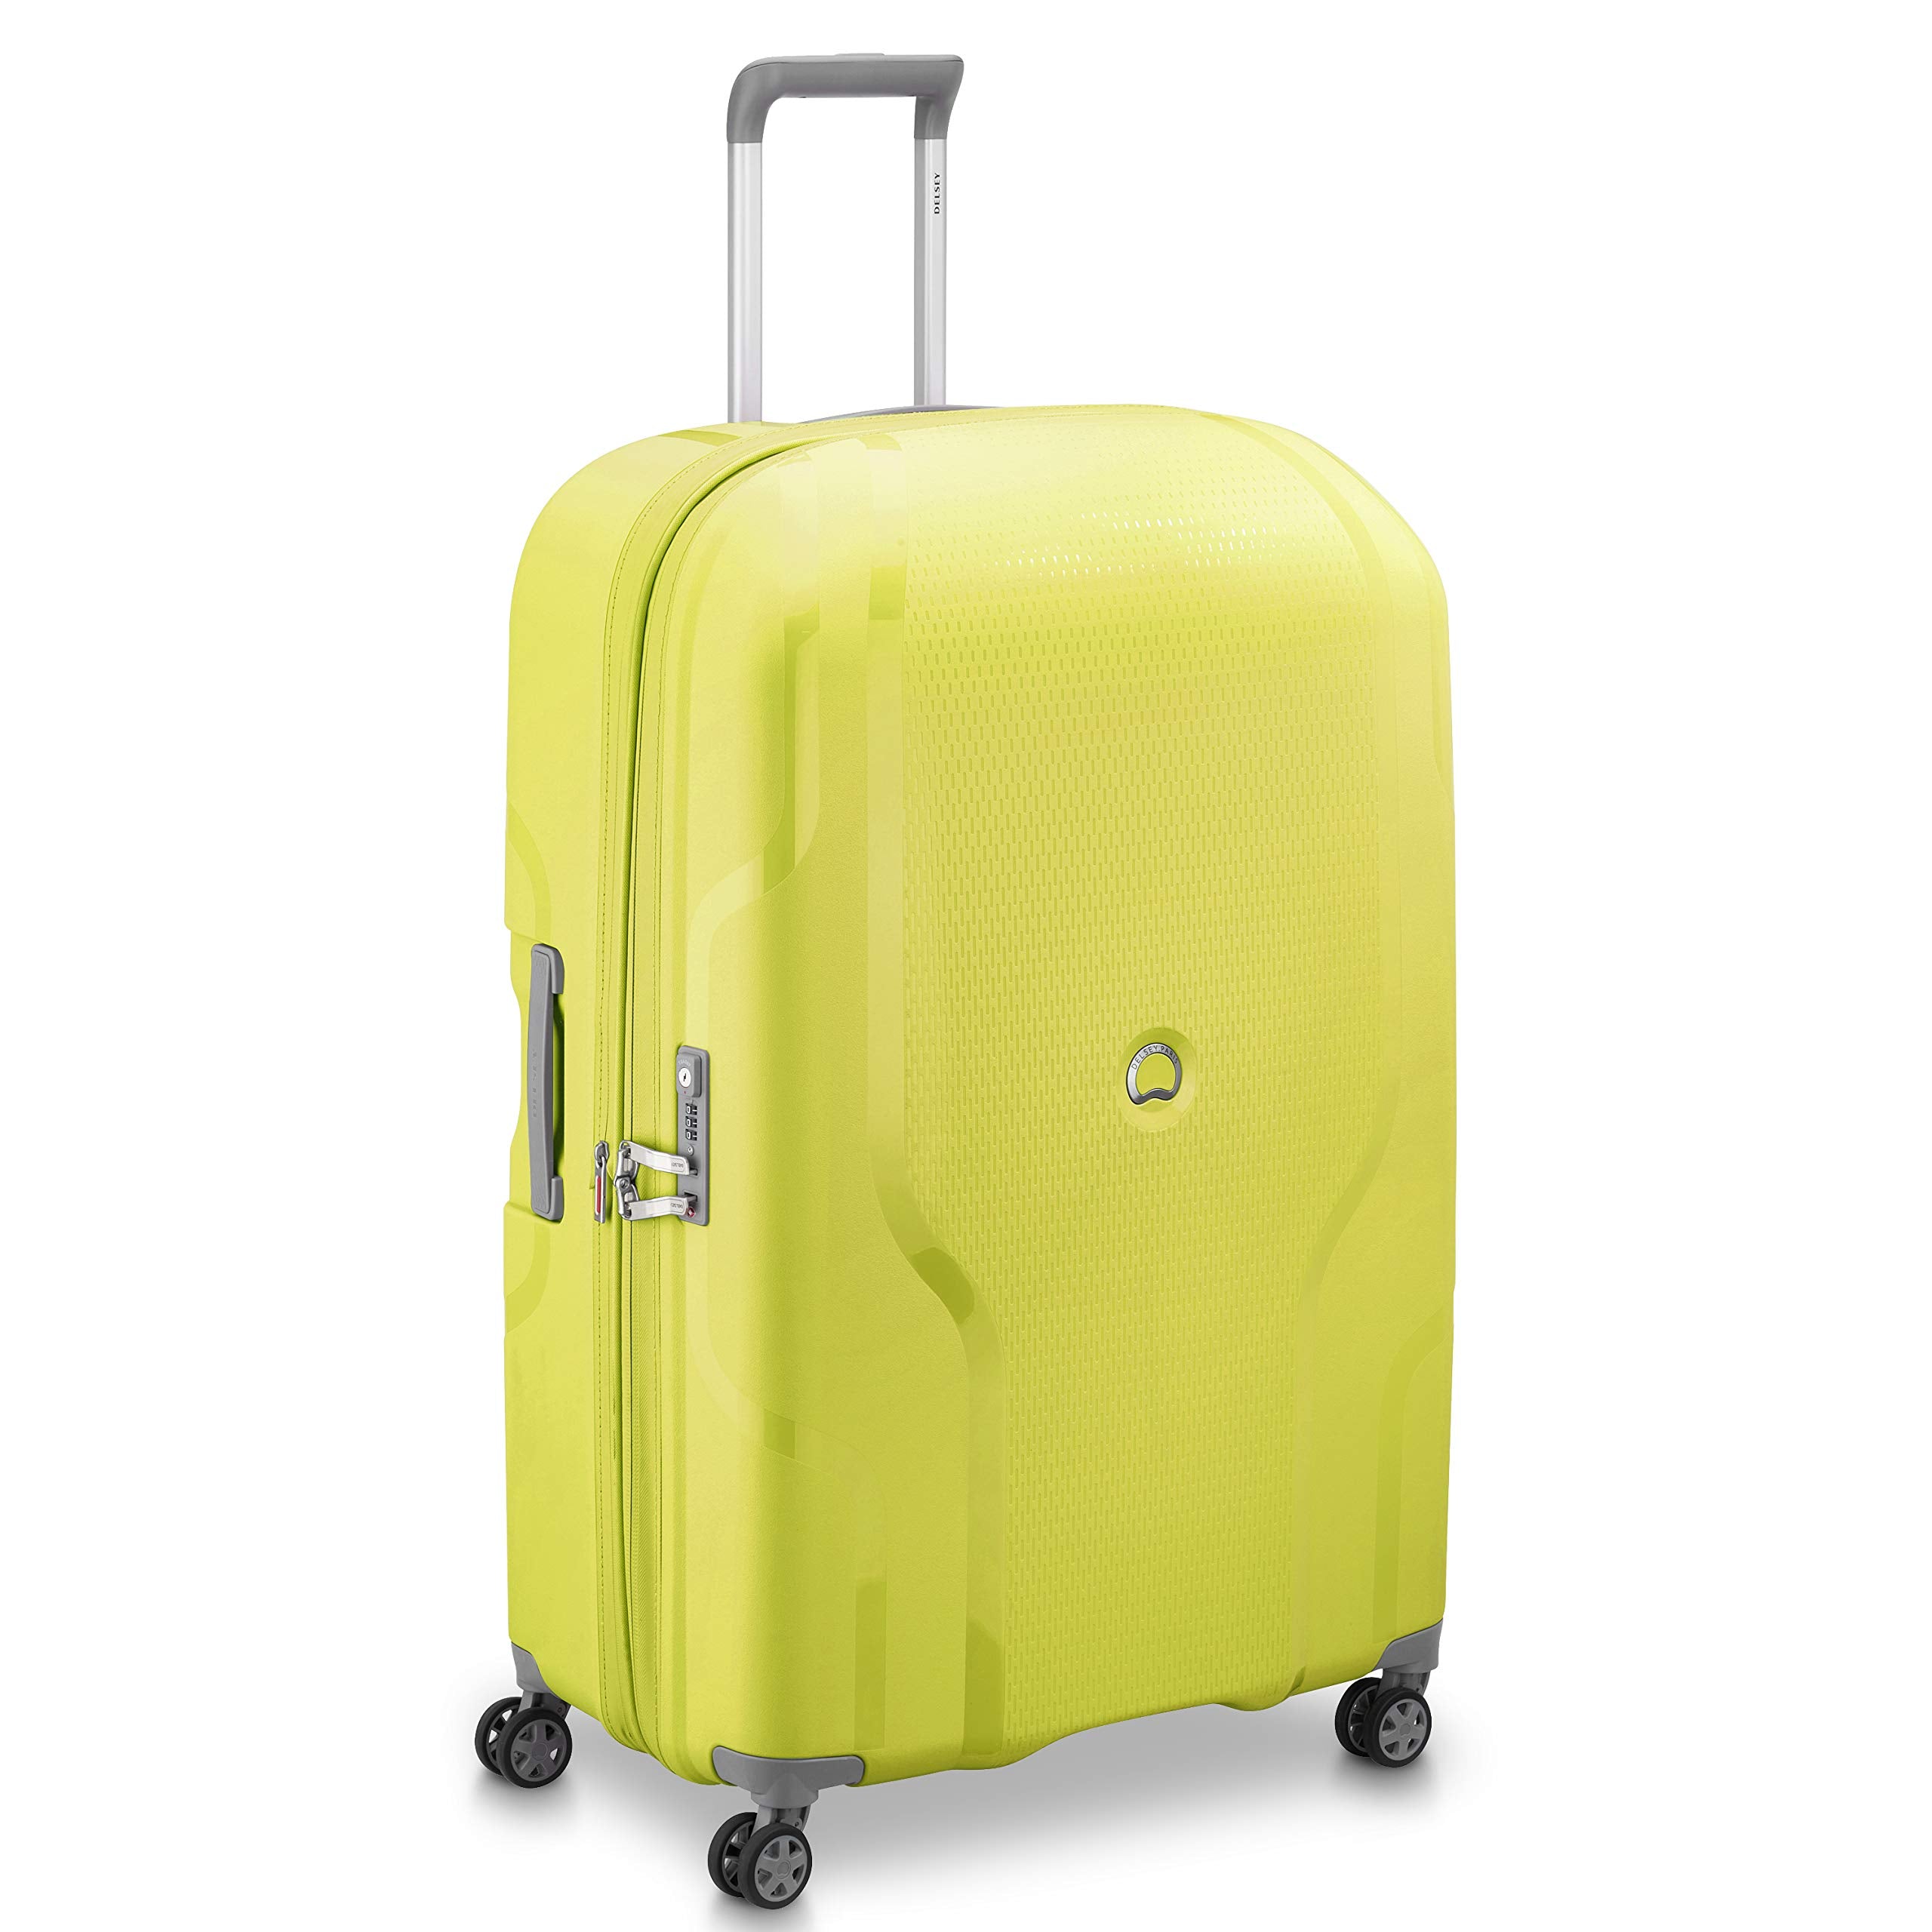 Delsey Luggage - Every Hard-Shell and Soft-Shell Suitcase Compared : Luggage  Review